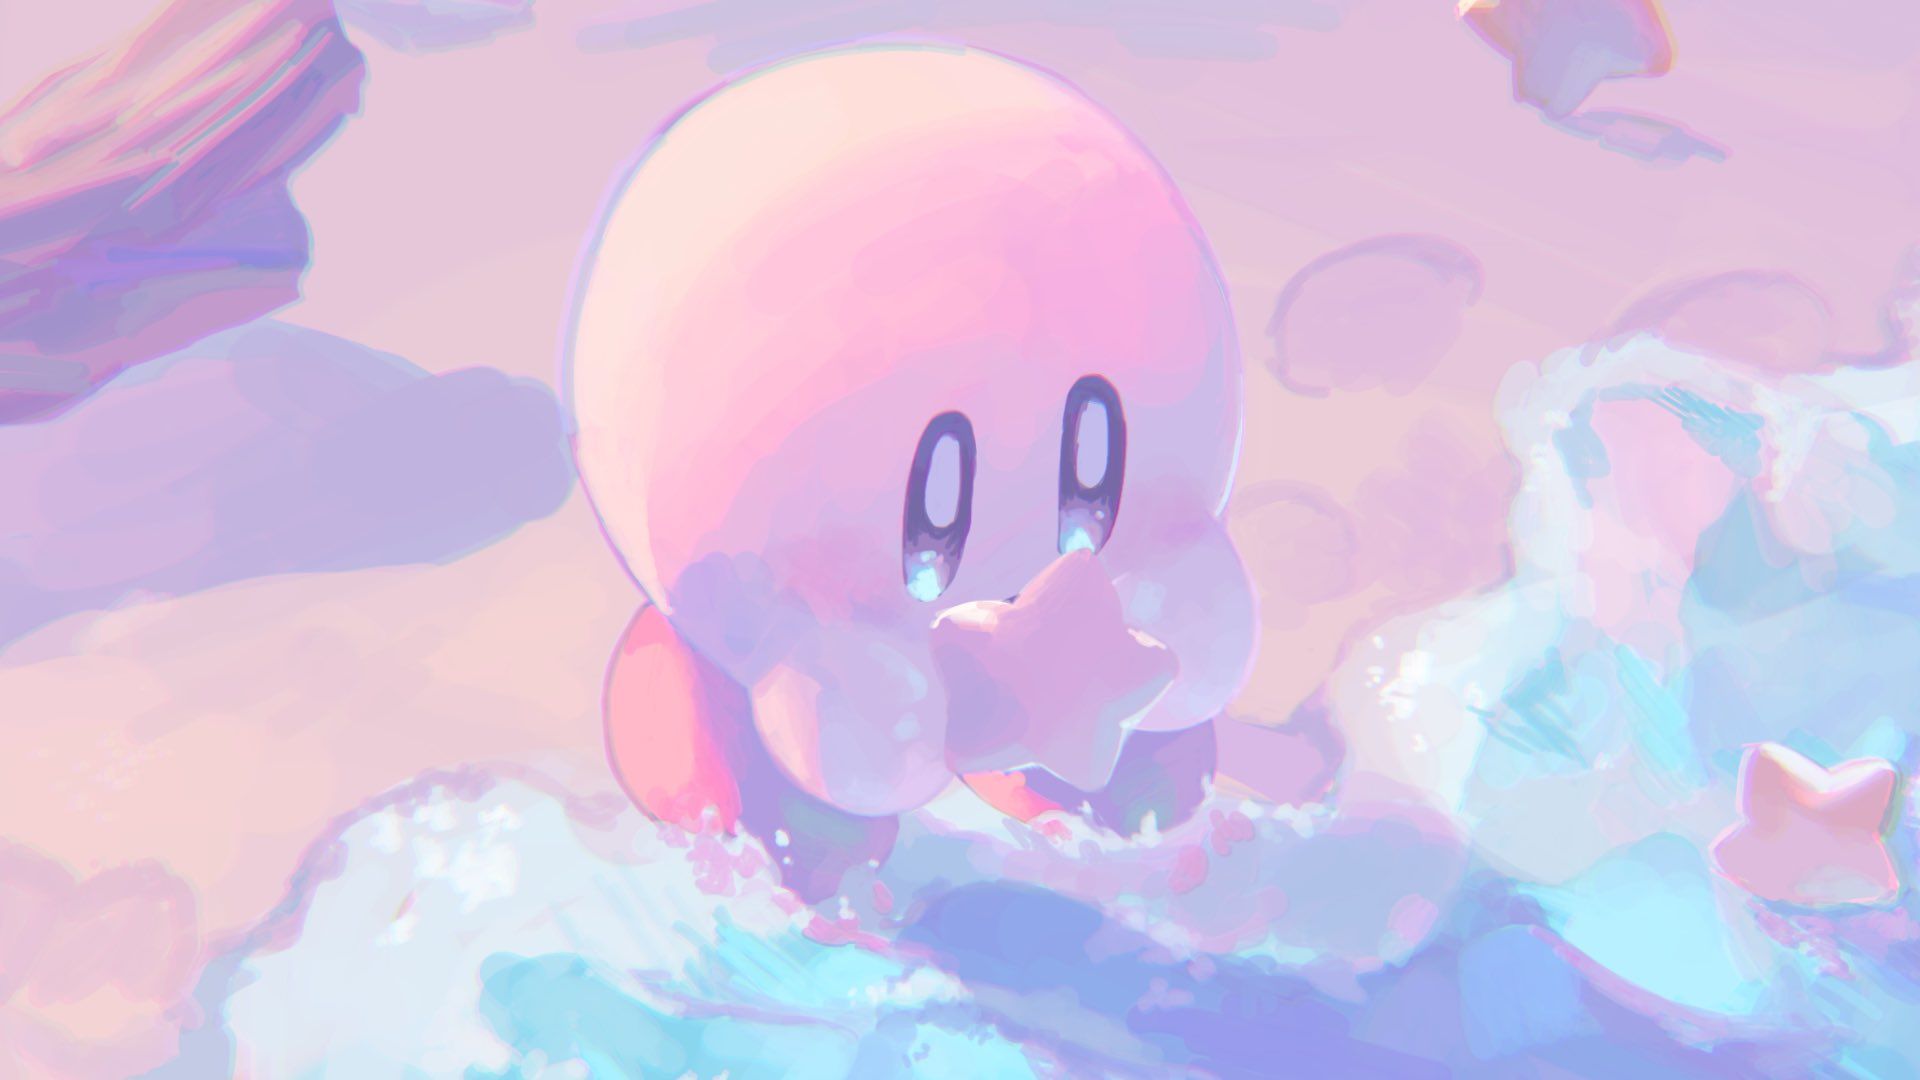 Kirby in the clouds - Kirby